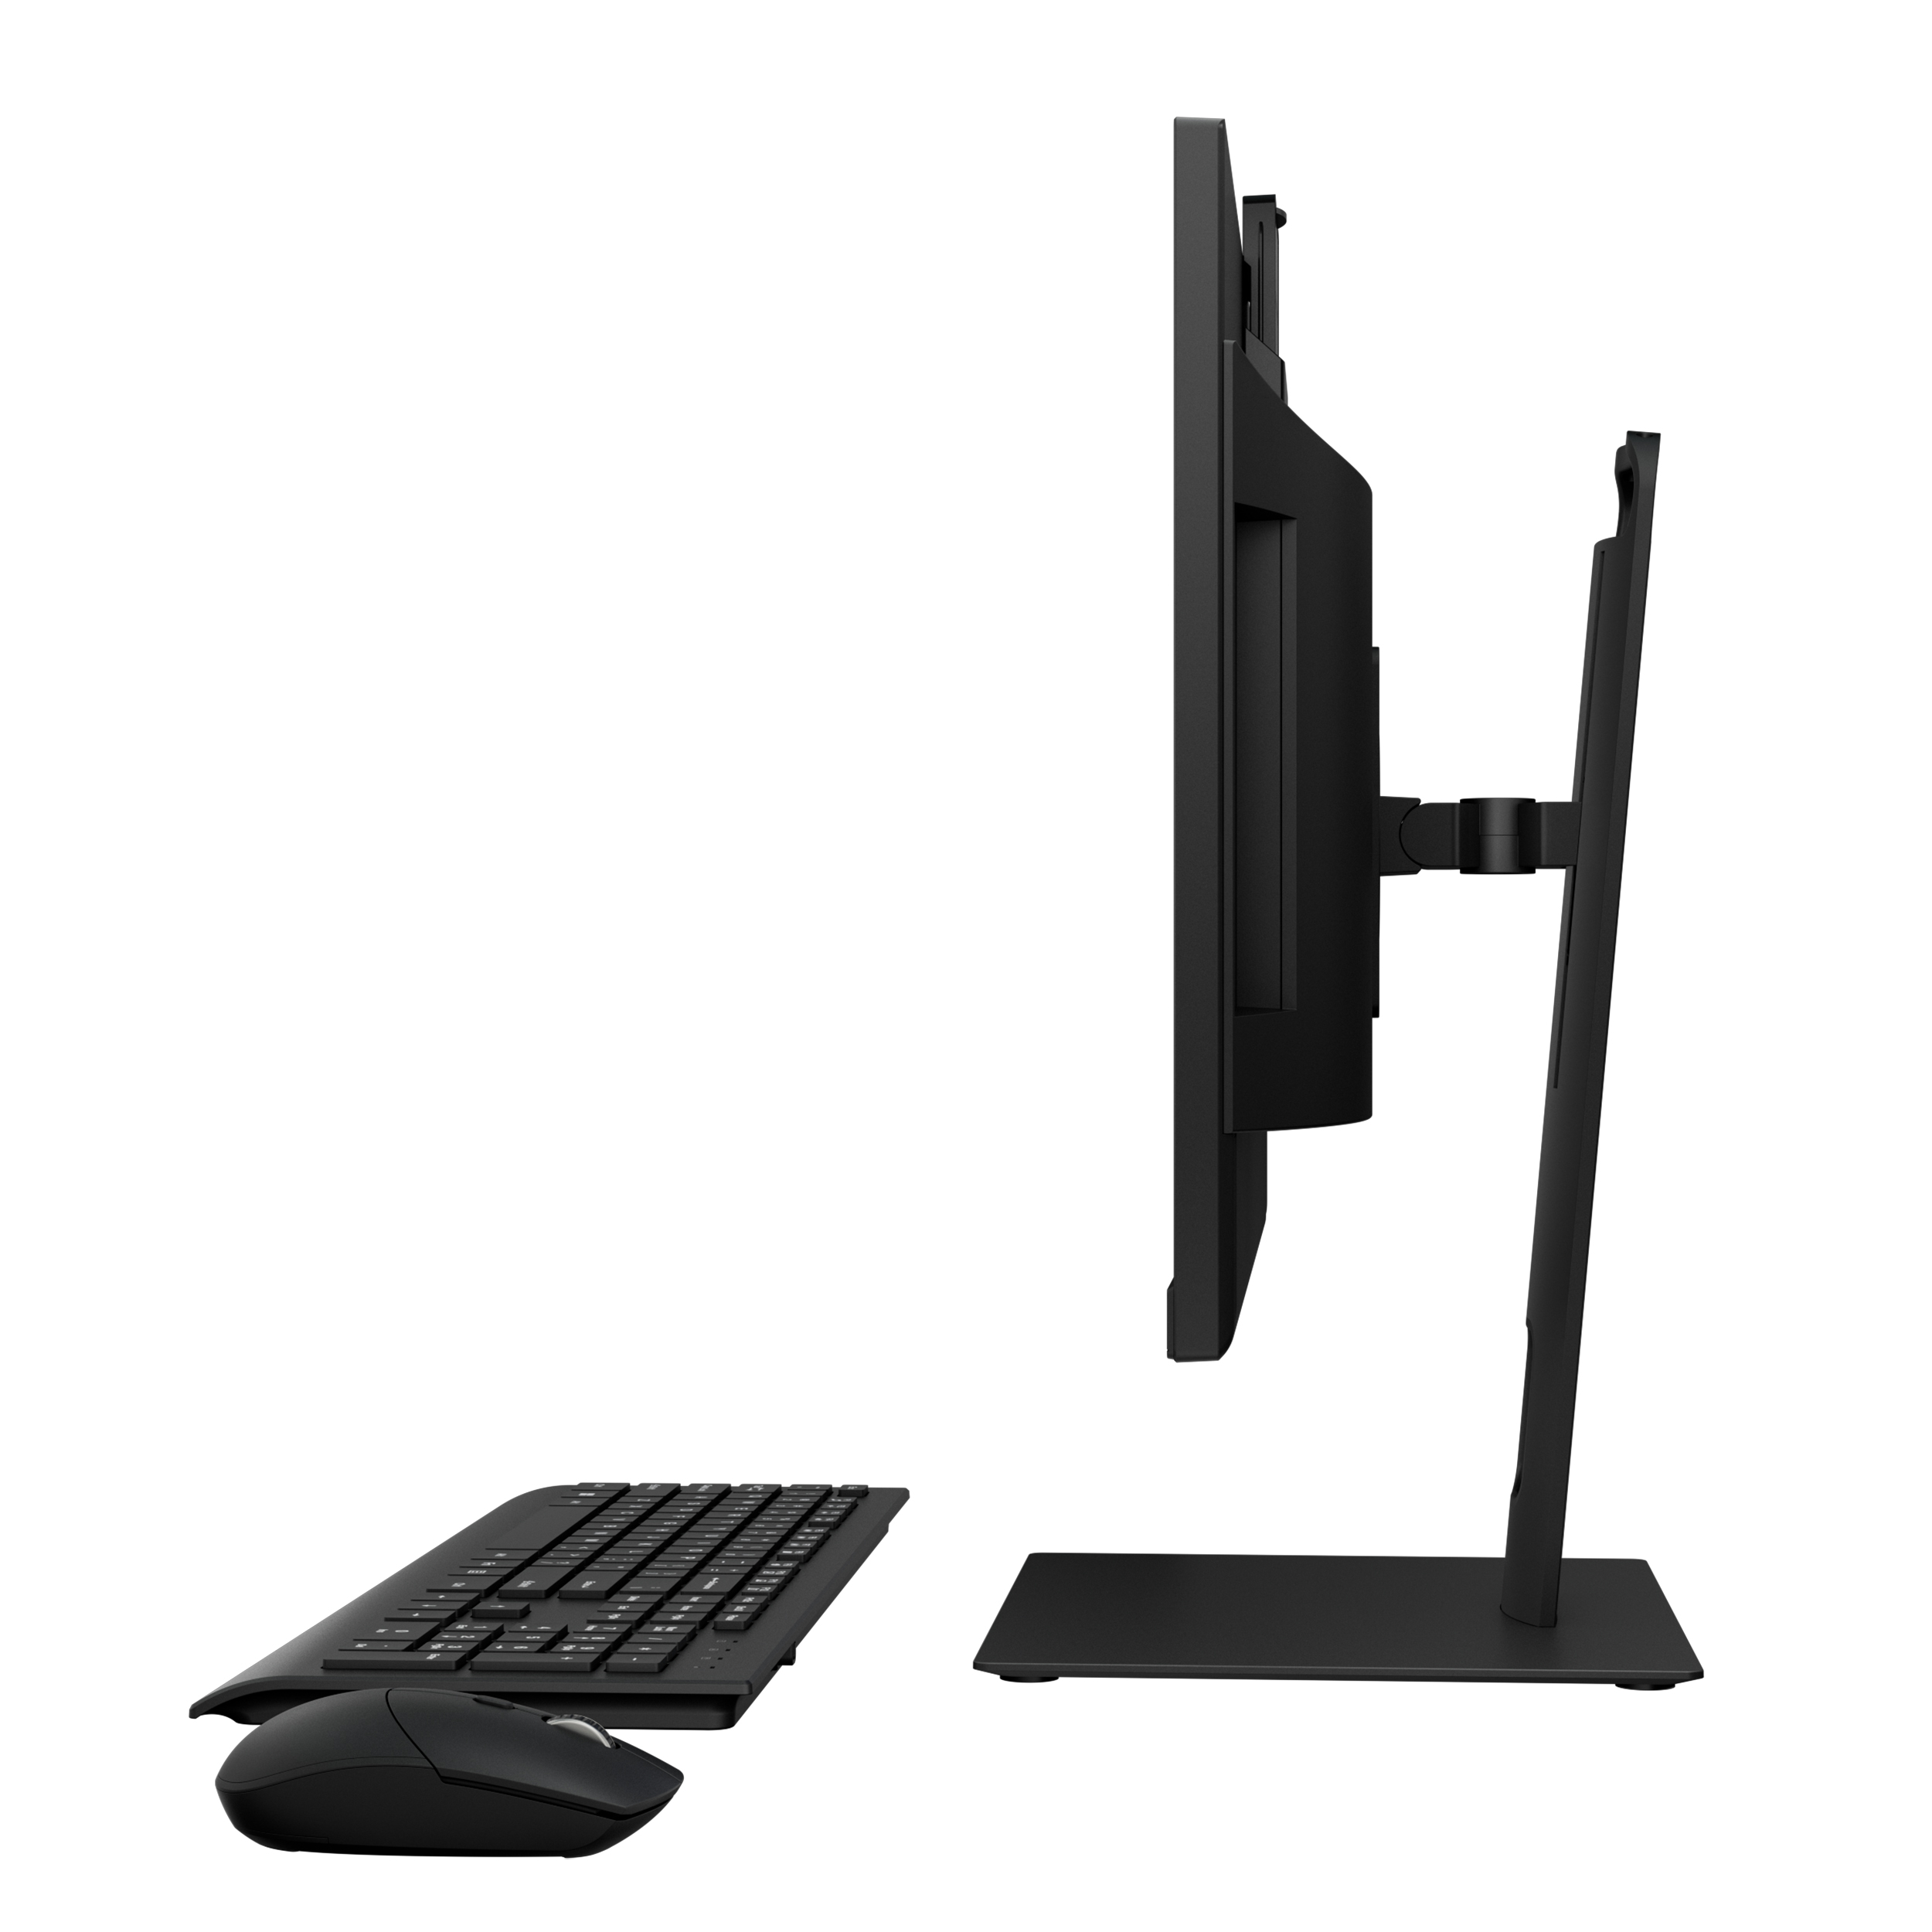 Gateway 23.8" All-in-one Desktop, Fully Adjustable Stand, FHD, Intel Pentium J5040, 4GB RAM, 128GB SSD, 2MP Camera, Windows 11, Microsoft 365 Personal 1-Year Included, Mouse & Keyboard Included, Black - image 4 of 11